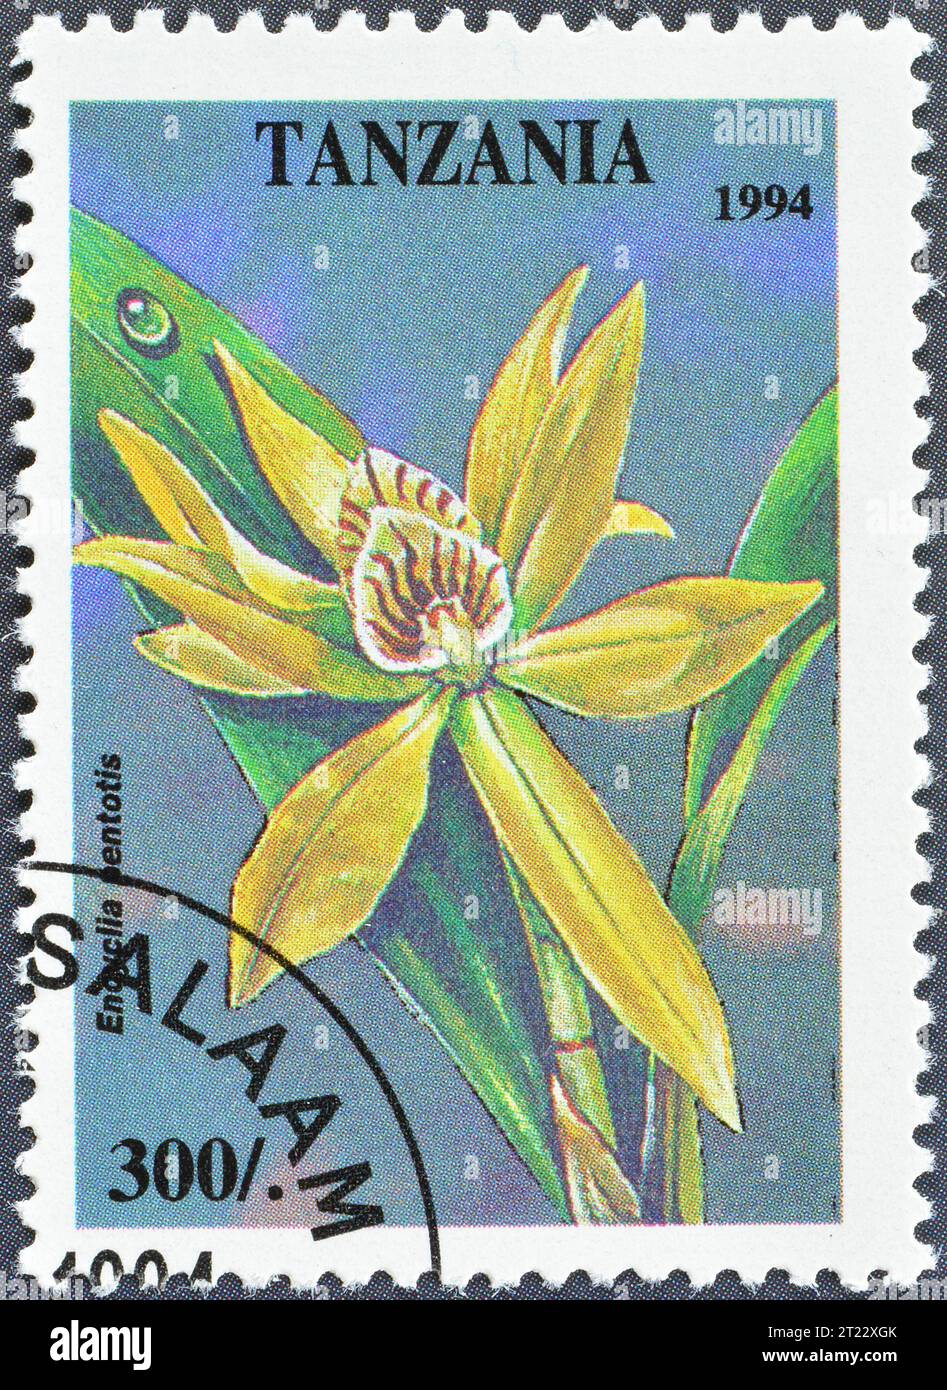 Cancelled postage stamp printed by Tanzania, that shows Encyclia pentotis, Tropical Flowers, circa 1994. Stock Photo